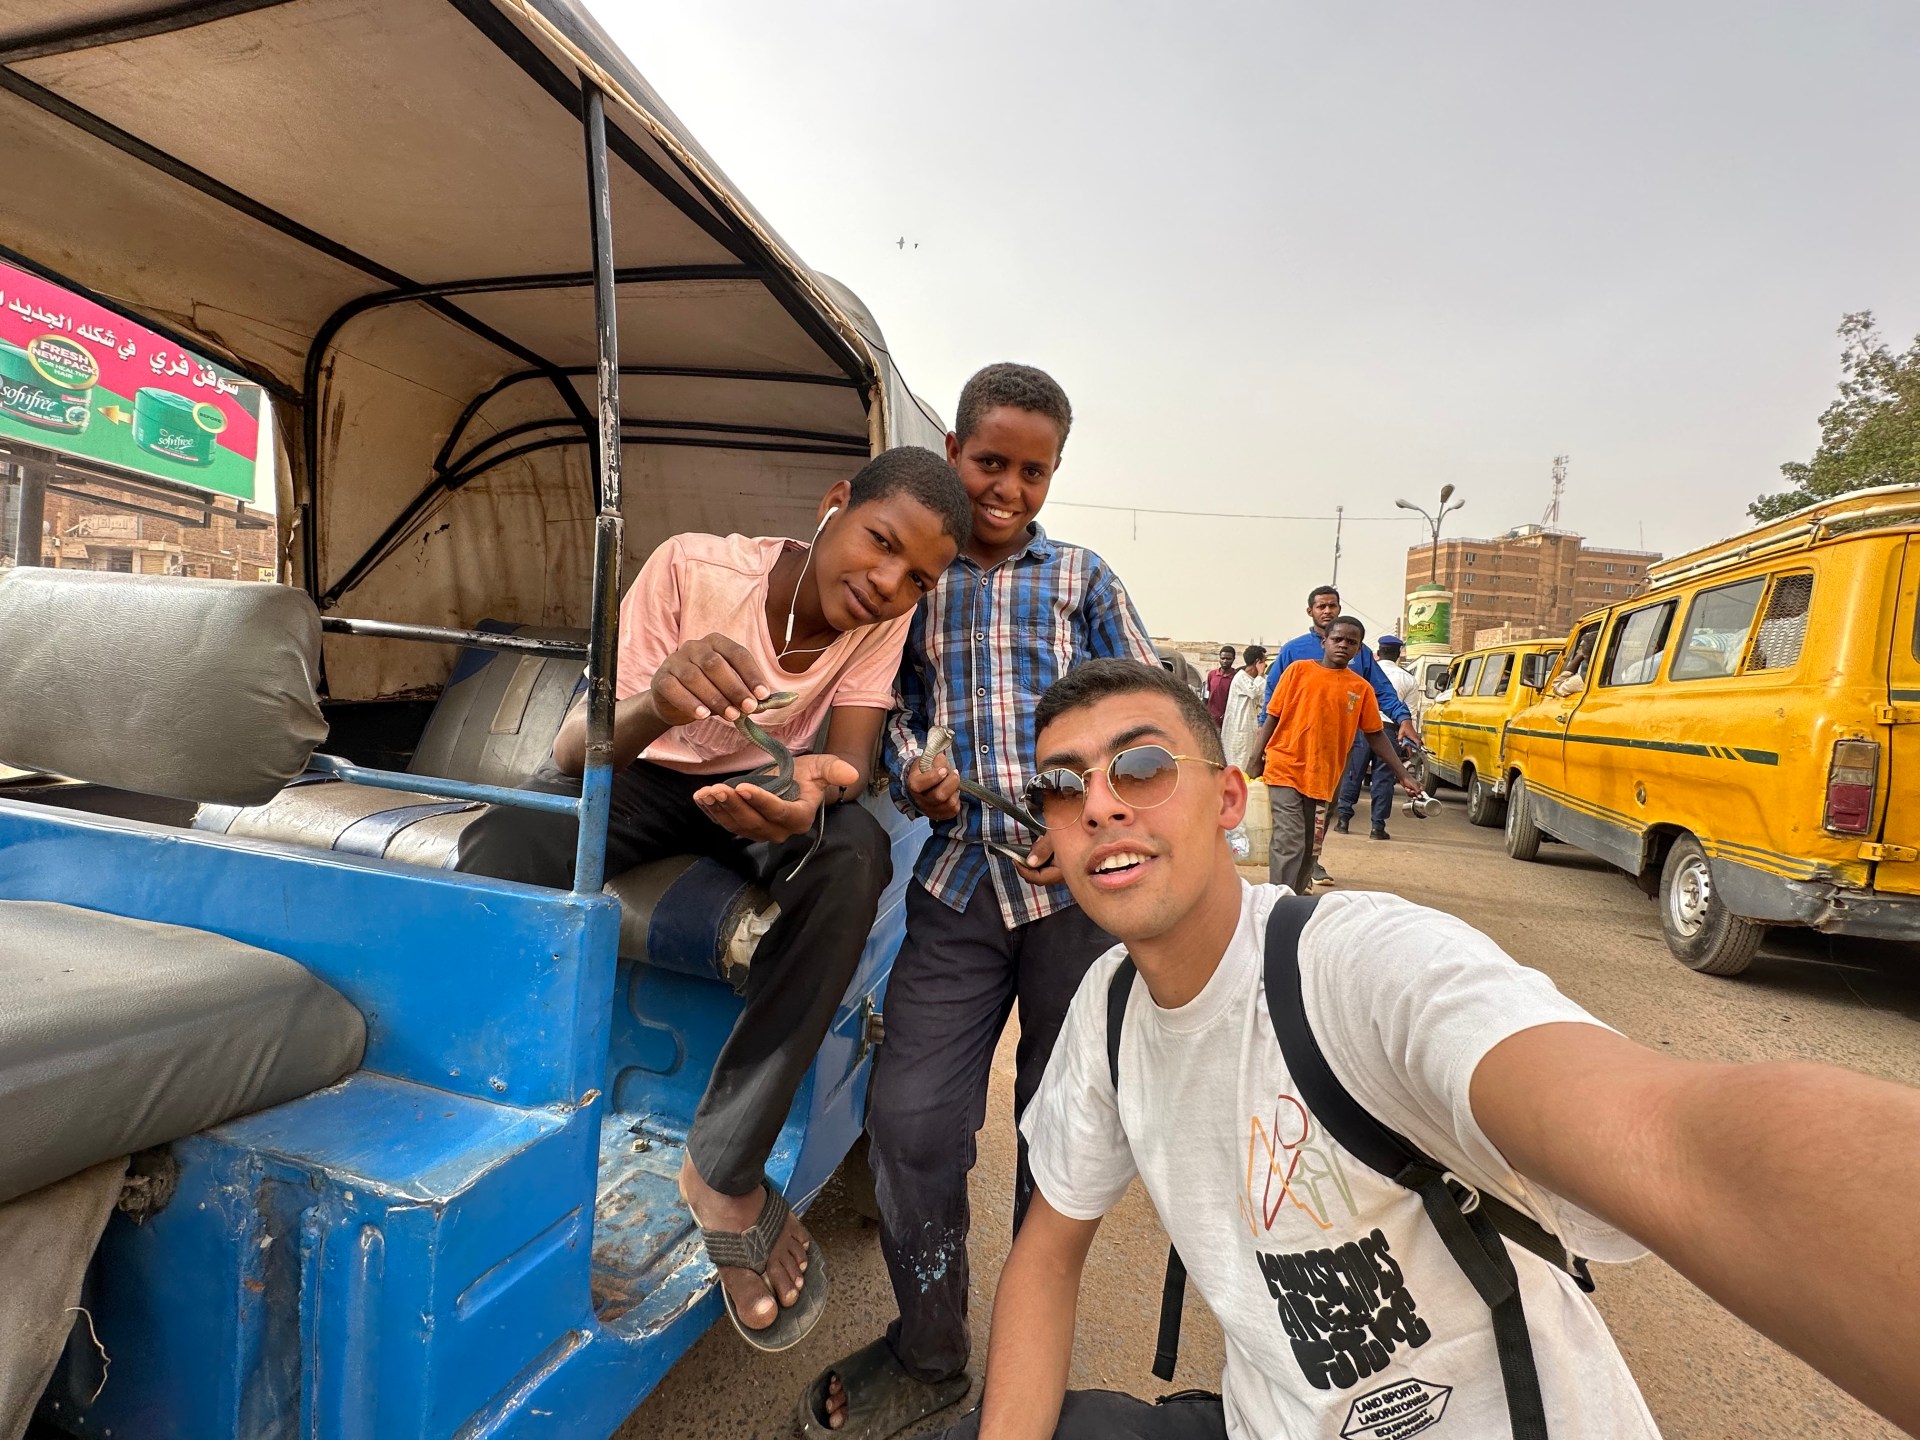 Stranded: Egyptian travel blogger trapped in Sudan conflict | News